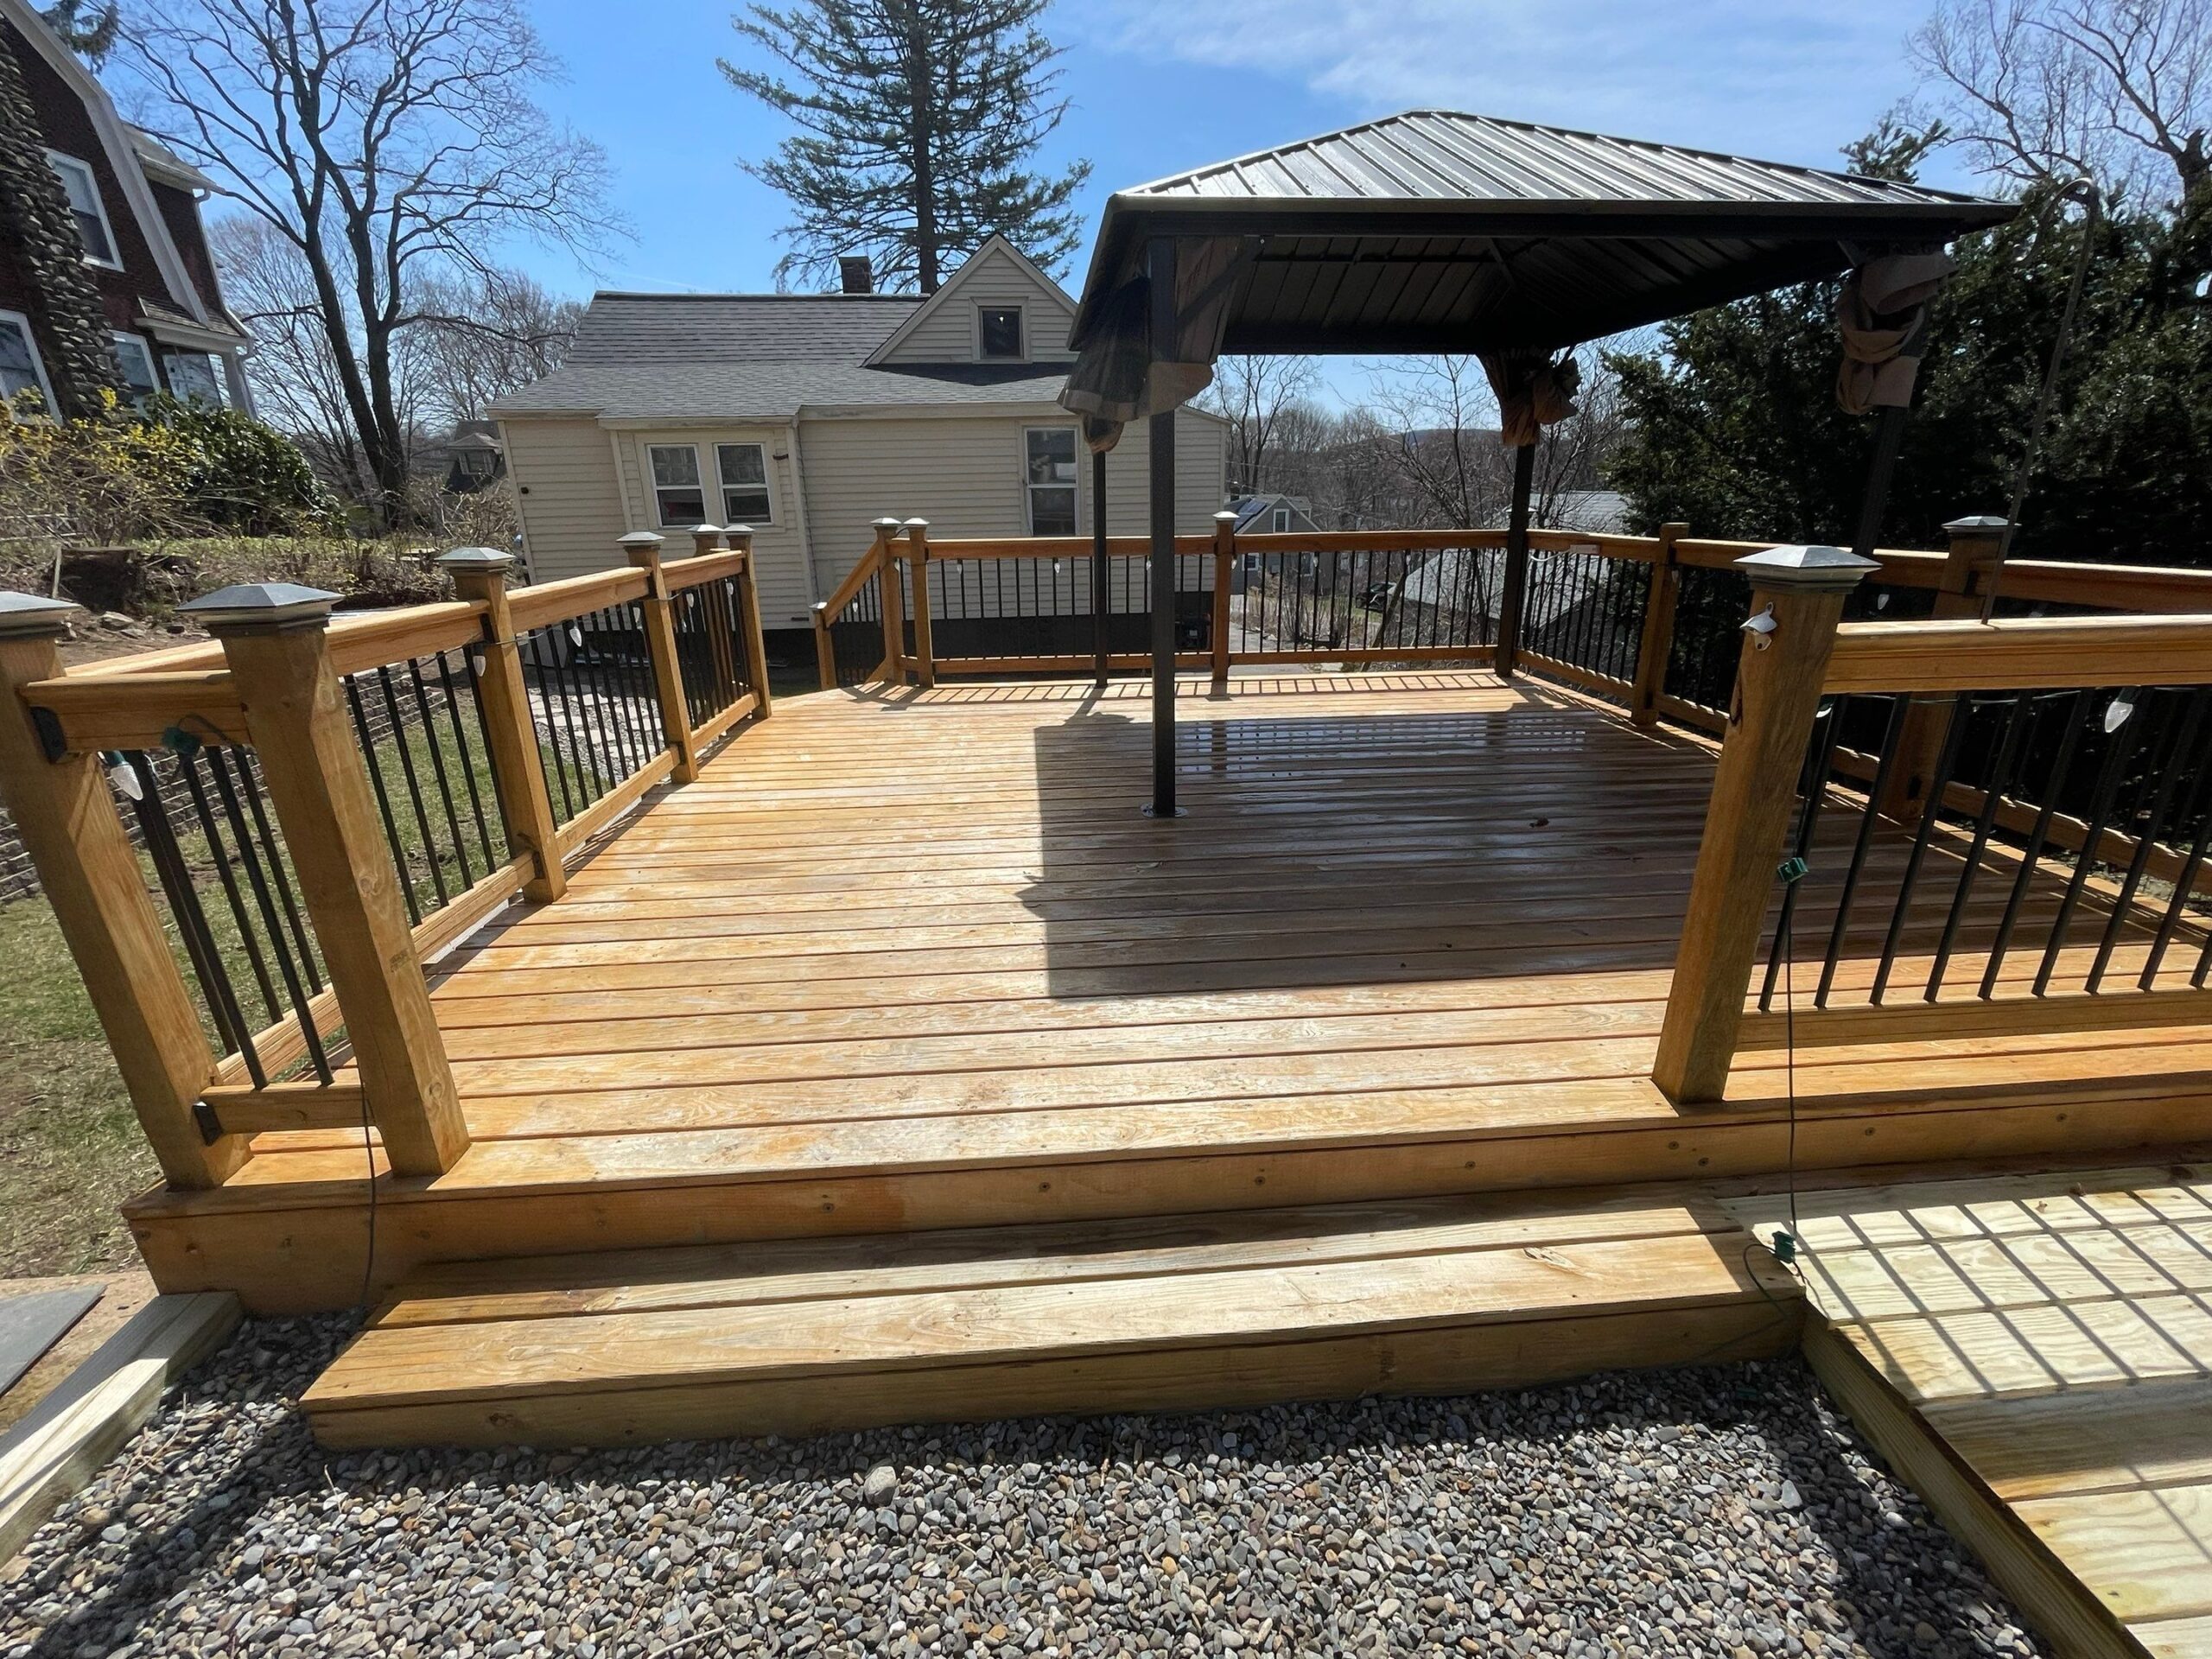 Clean deck after "Deck cleaning"